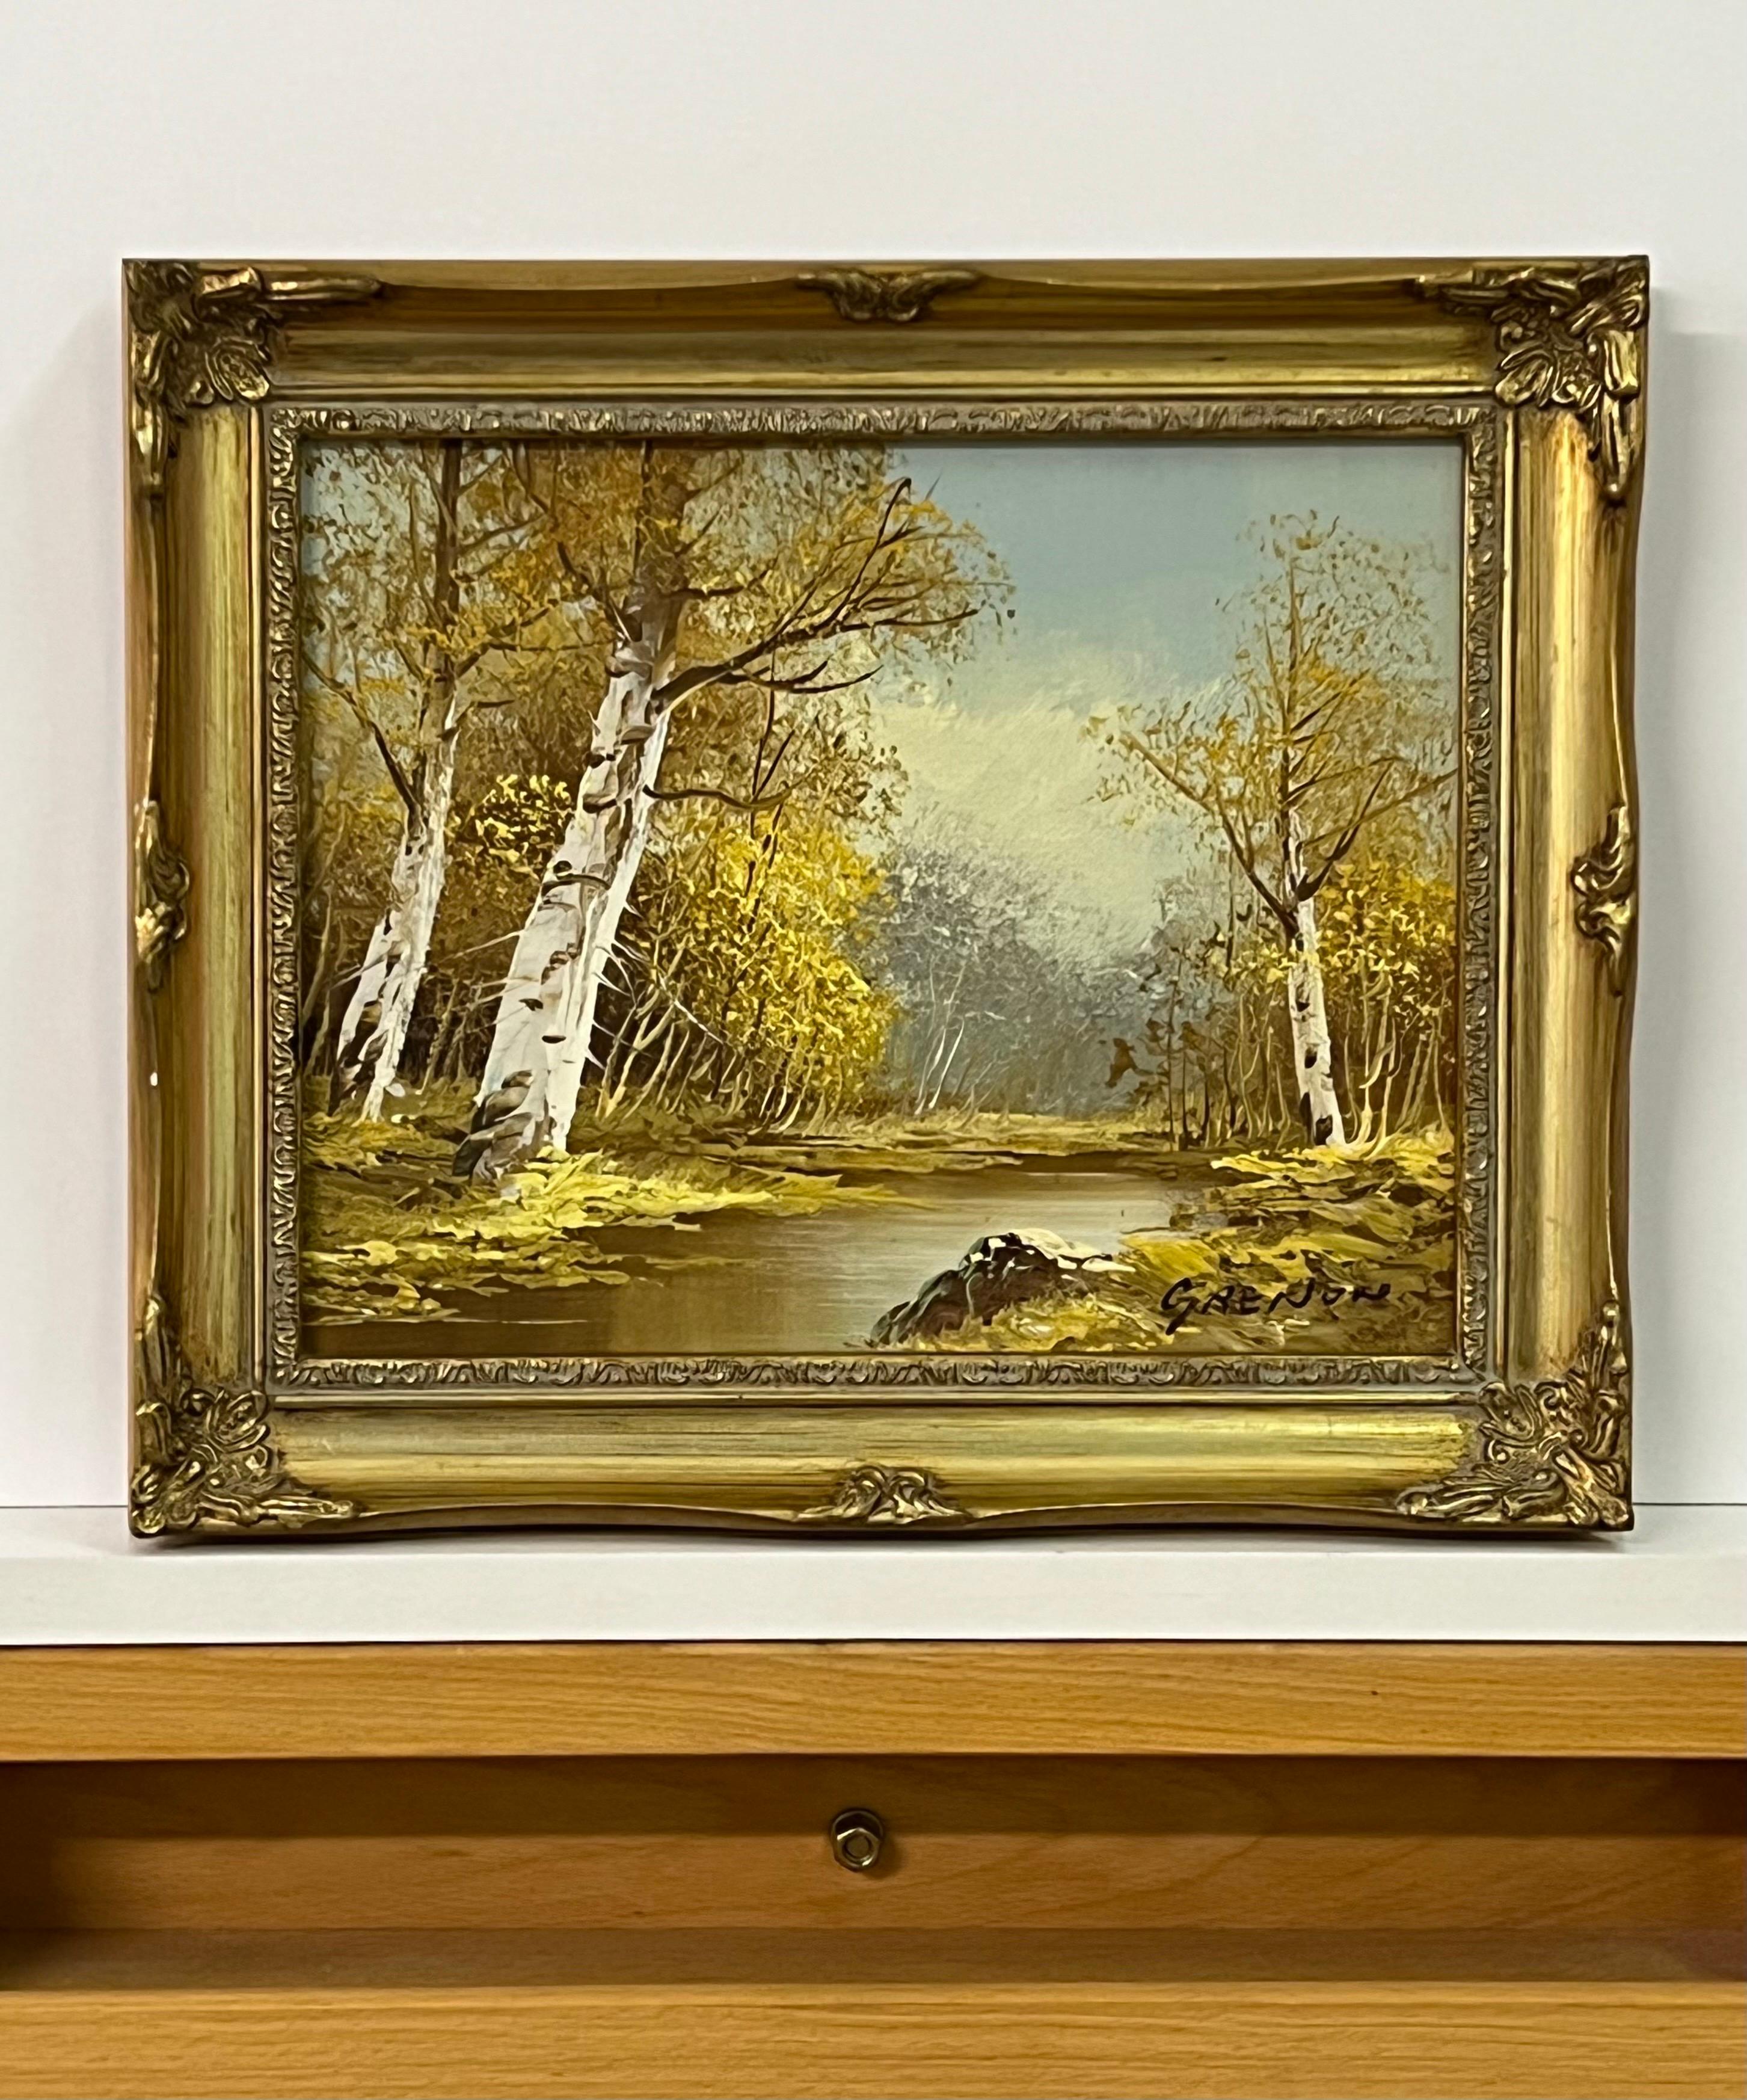 Vintage 20th Century Oil Painting of a River Landscape with Silver Birch Trees 

Art measures 10 x 8 inches 
Frame measures 12 x 10 inches 

Presented in the original period frame 